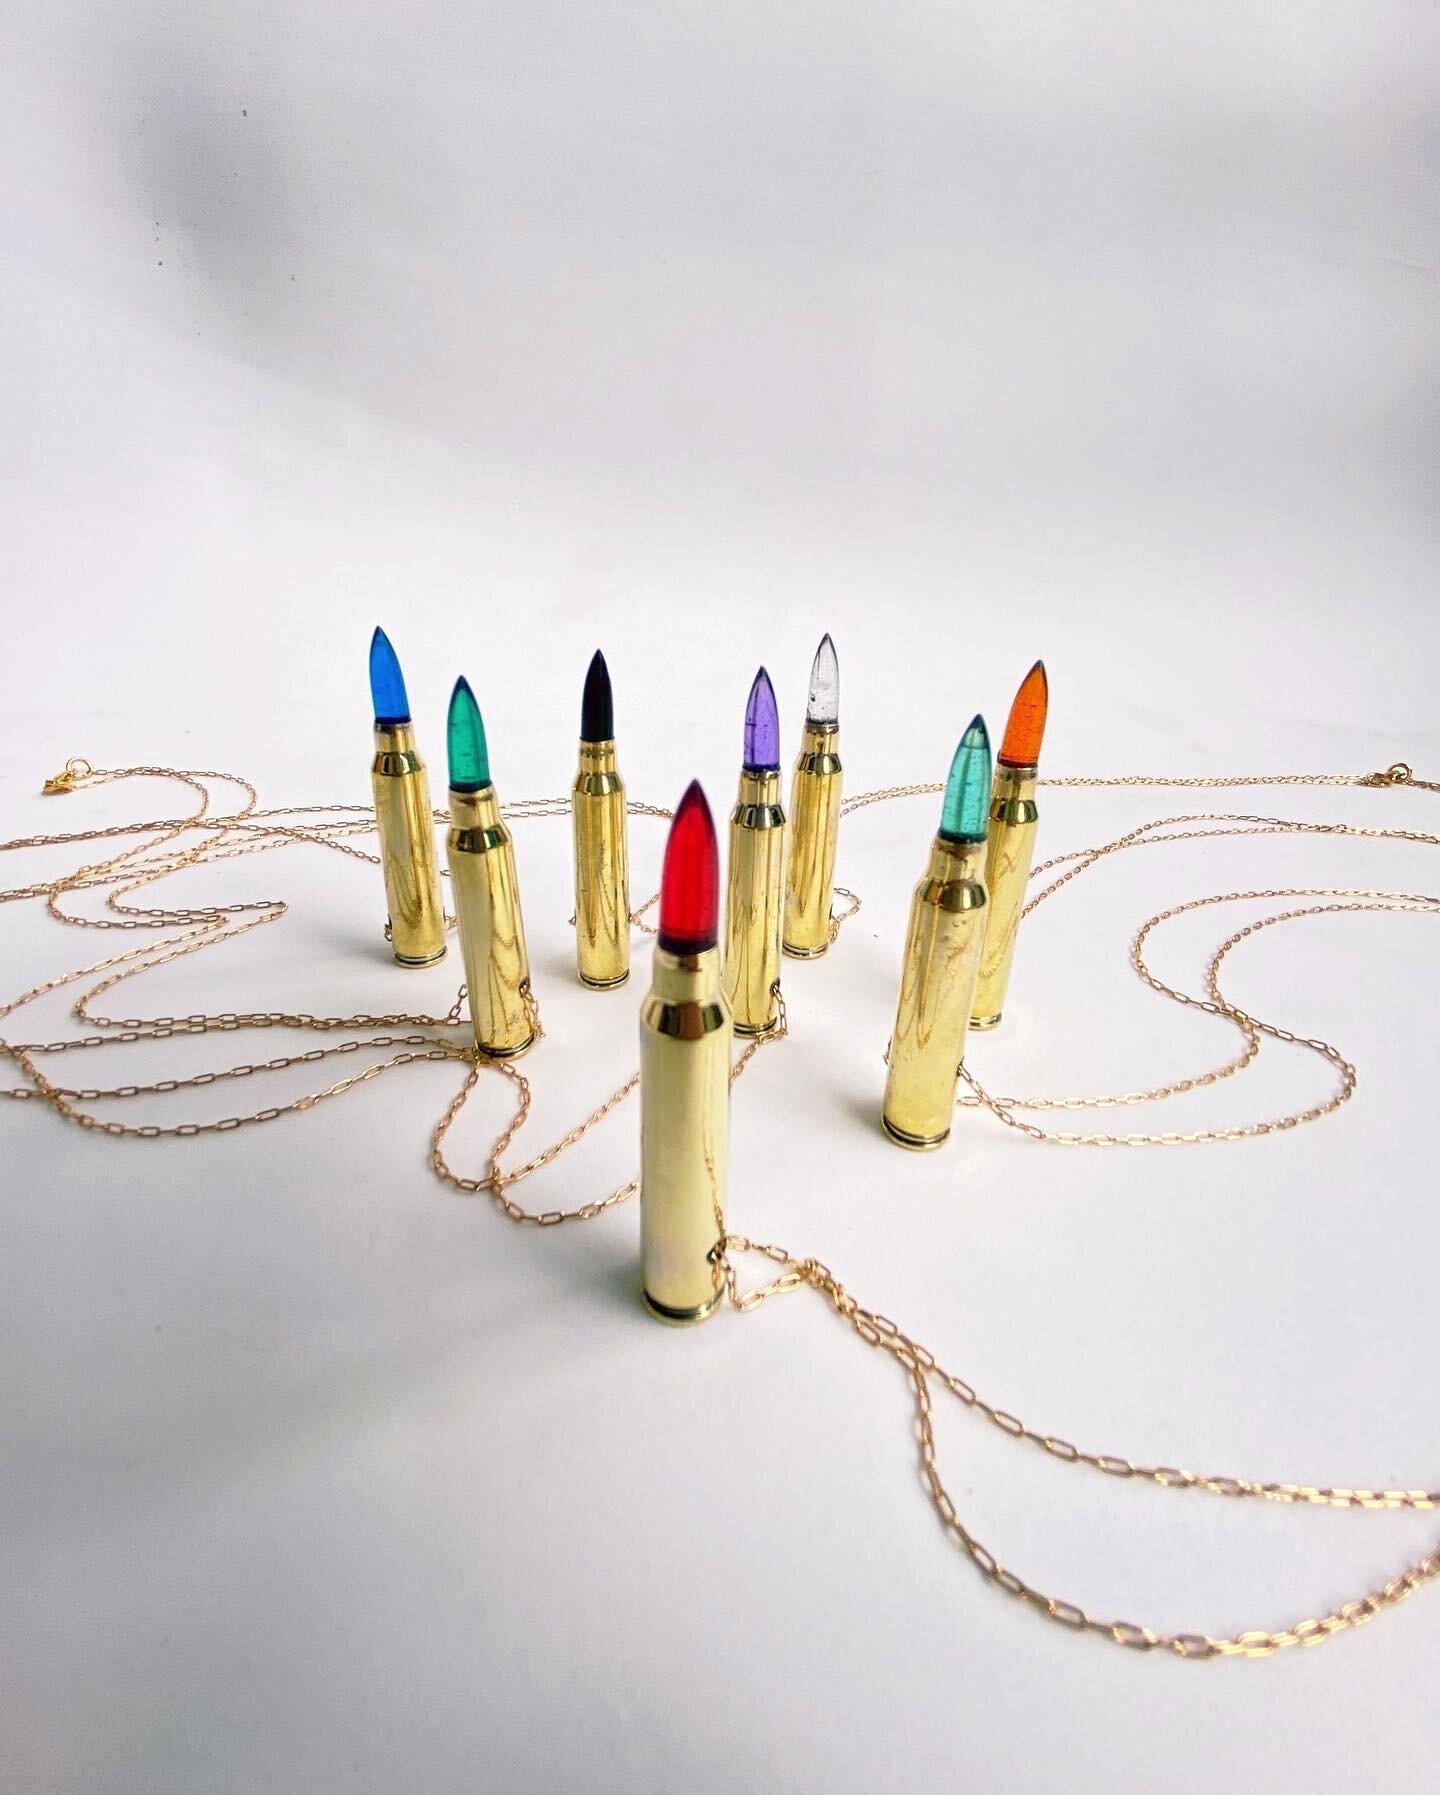 These unique chain pendants are made using gold filled stainless steel chain and feature a gold filled bullet set with colored resin of your choice (custom colors available ) These statement pieces come from the War & Peace collection by Sebastian